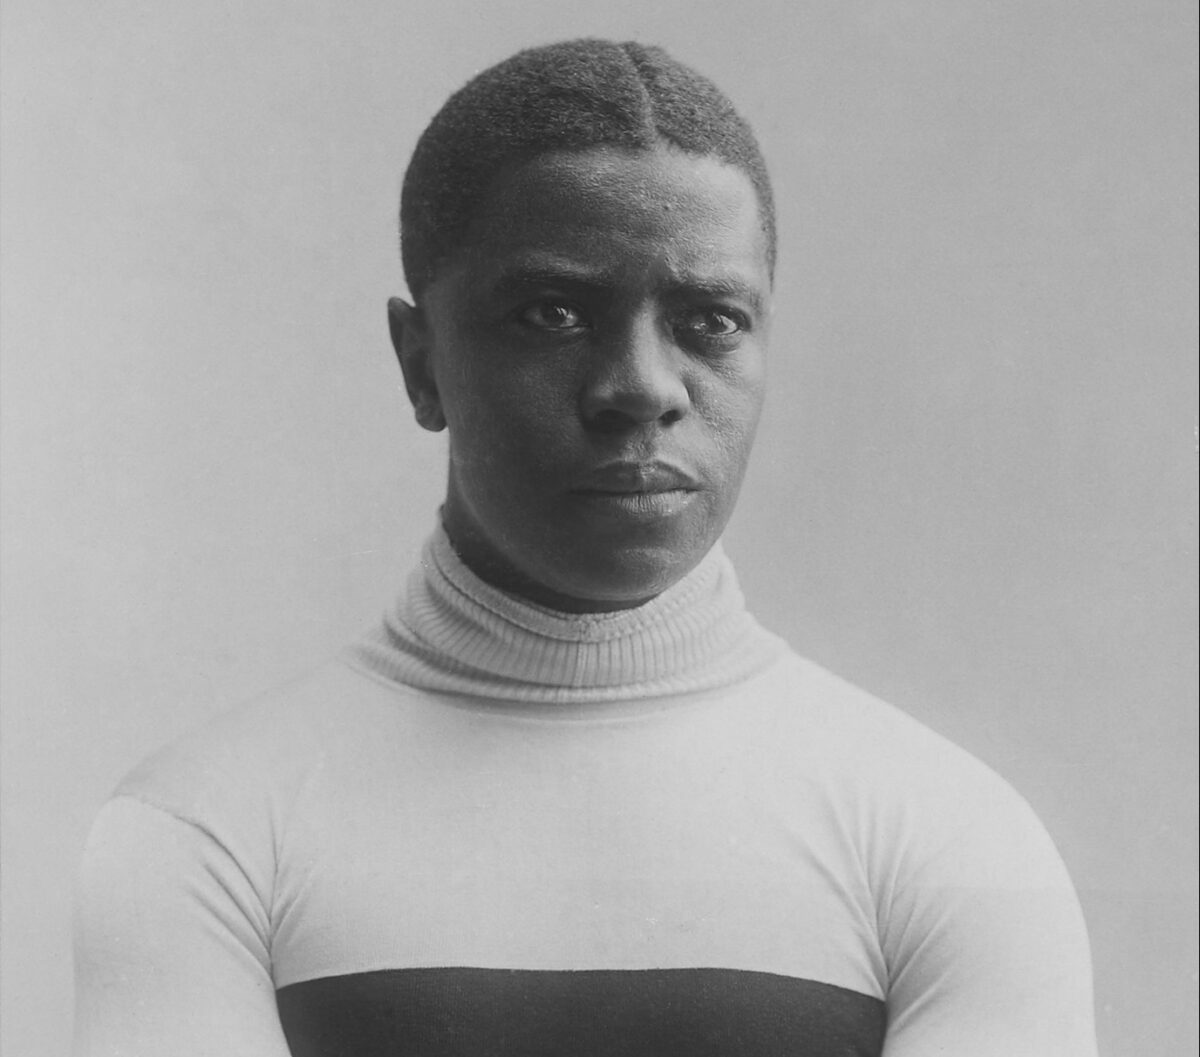 In 1899, Taylor won the world championship, making him an international celebrity. Portrait of Major Taylor by photographer Jules Beau, between 1906 and 1907. (Public Domain)